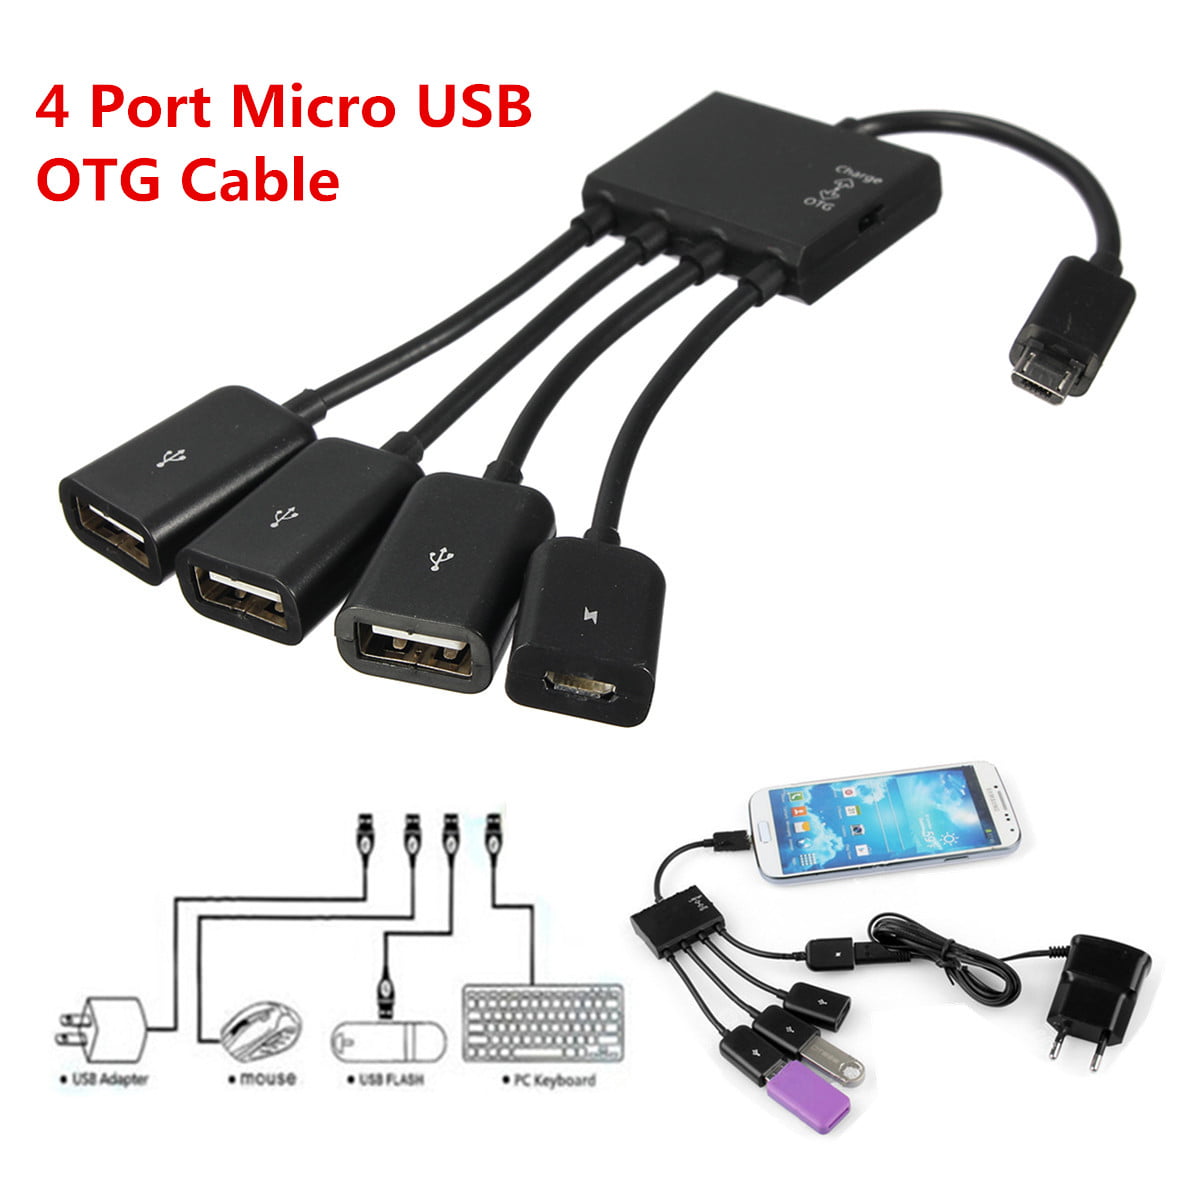 Zip PRO OTG Adapter Works with Intel Nuc for OTG and USB Type-C Braided Cable Mouse More Gamepad hdmi Gray Use with Devices Like Keyboard 